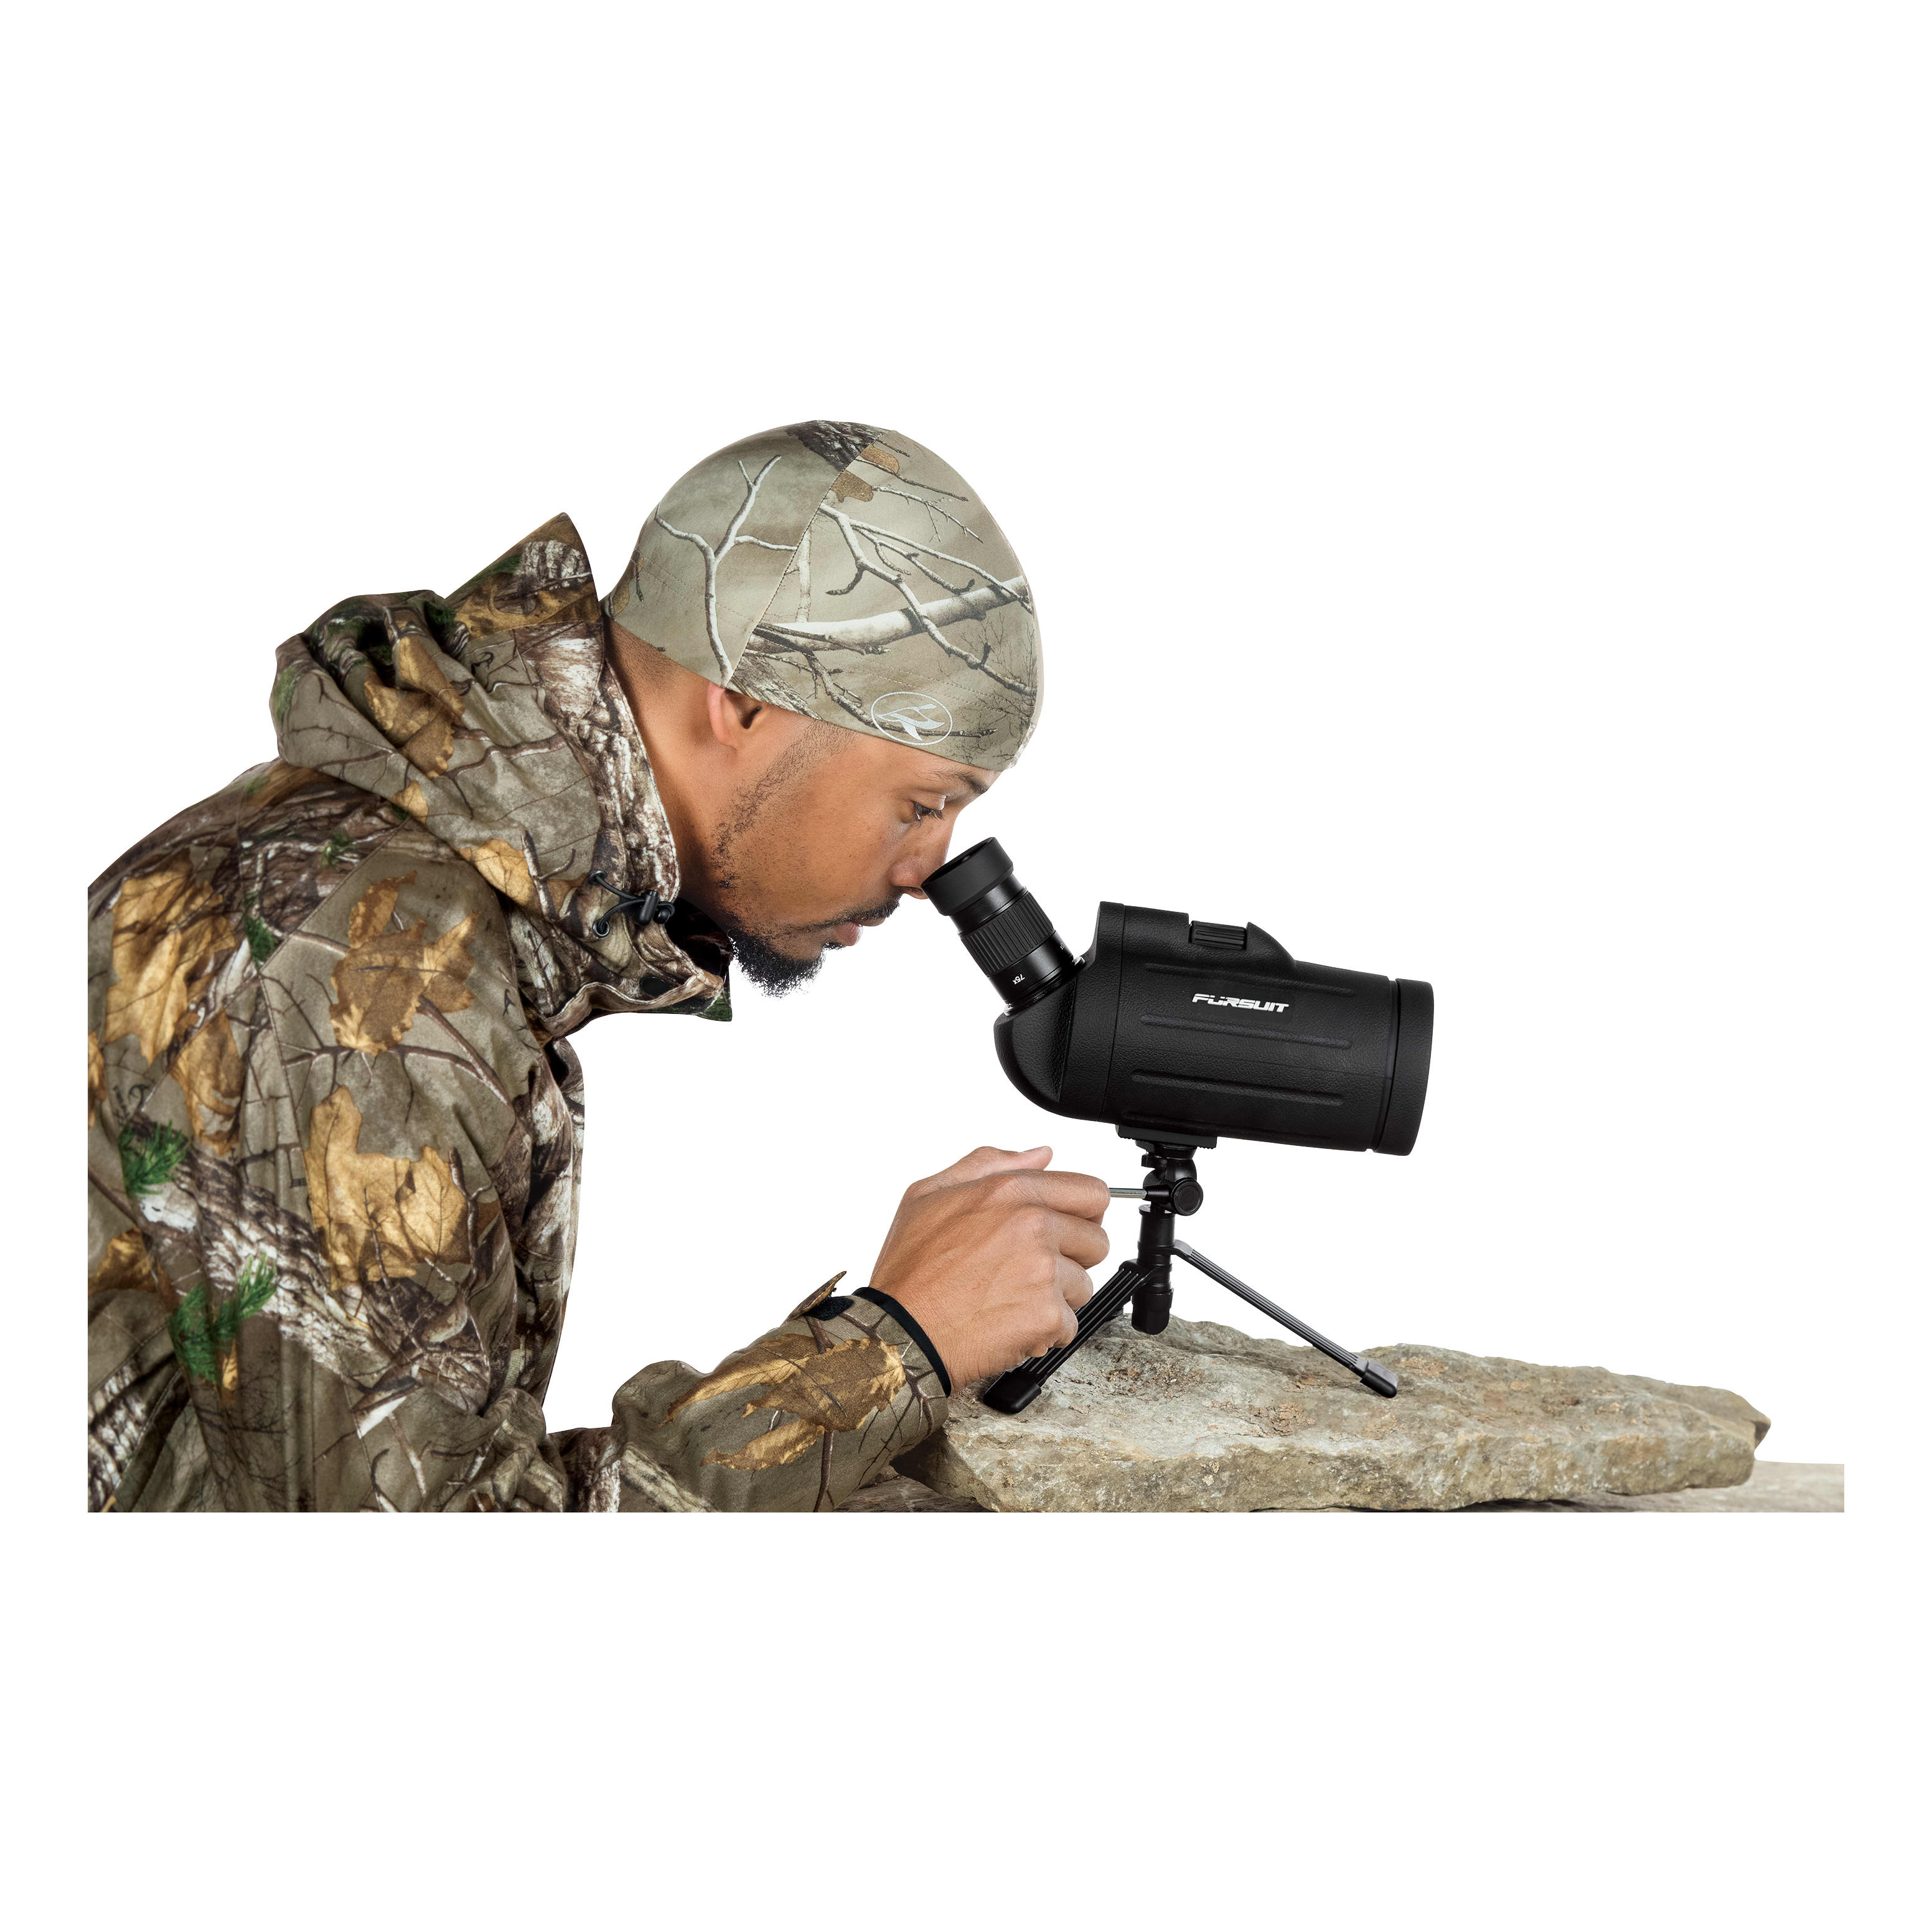 Pursuit® X1 Compact Spotting Scope - In the Field